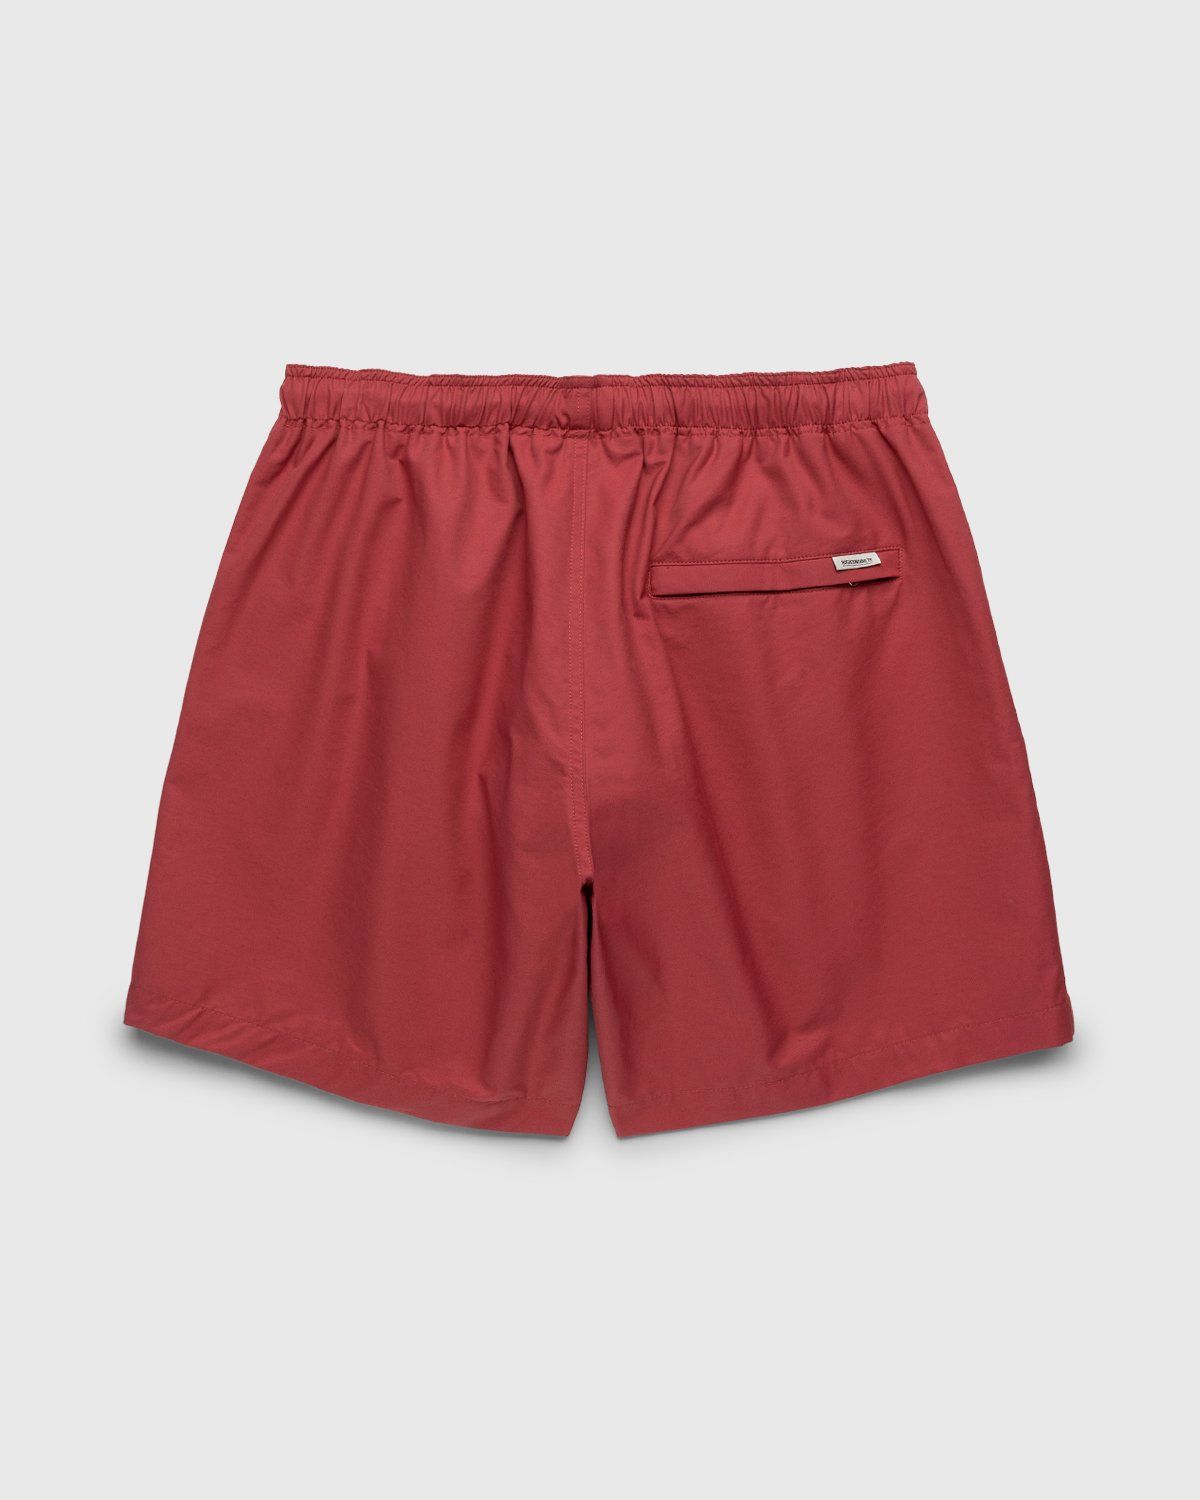 Highsnobiety – Cotton Nylon Water Short Red - Active Shorts - Pink - Image 2